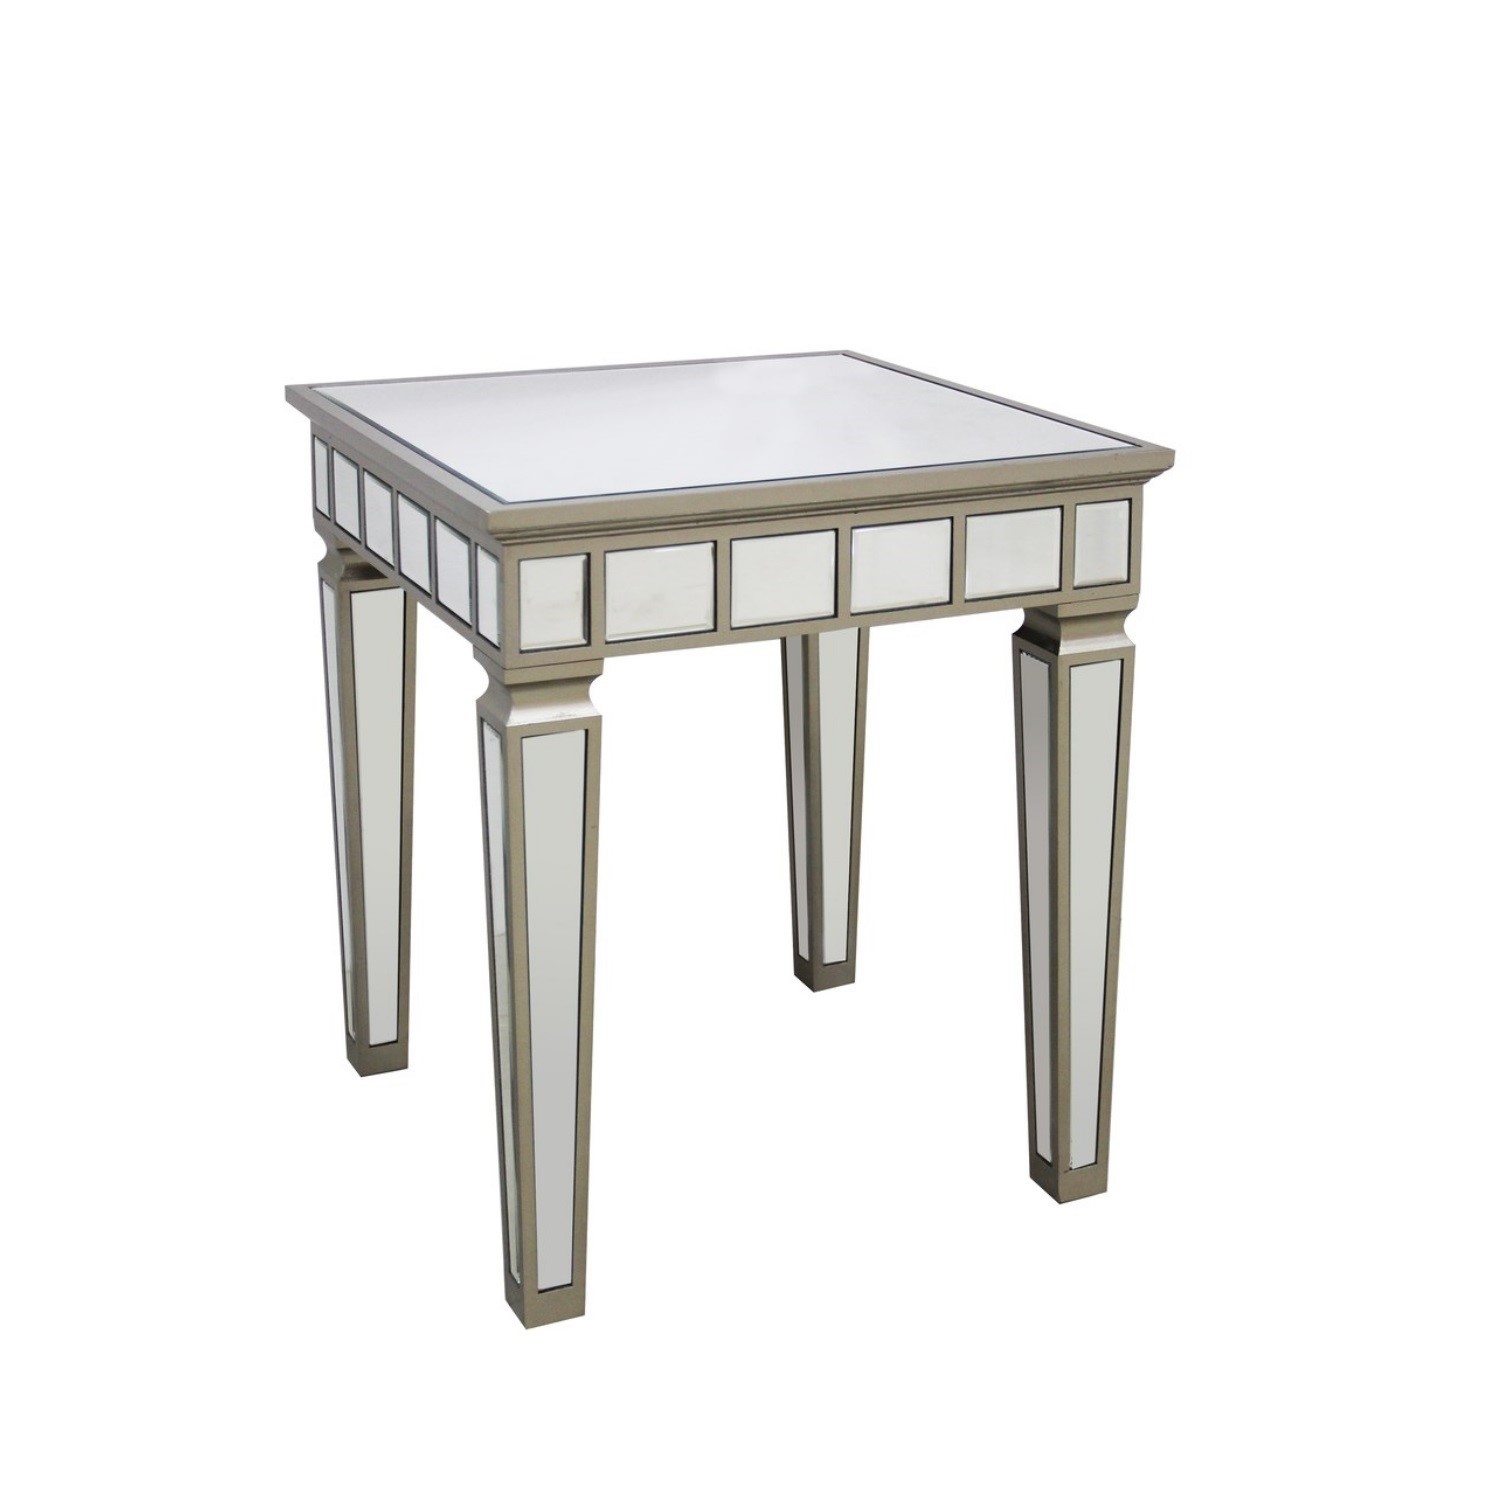 Mirrored Side Table With Gold Detailing, Thin Mirrored Side Table